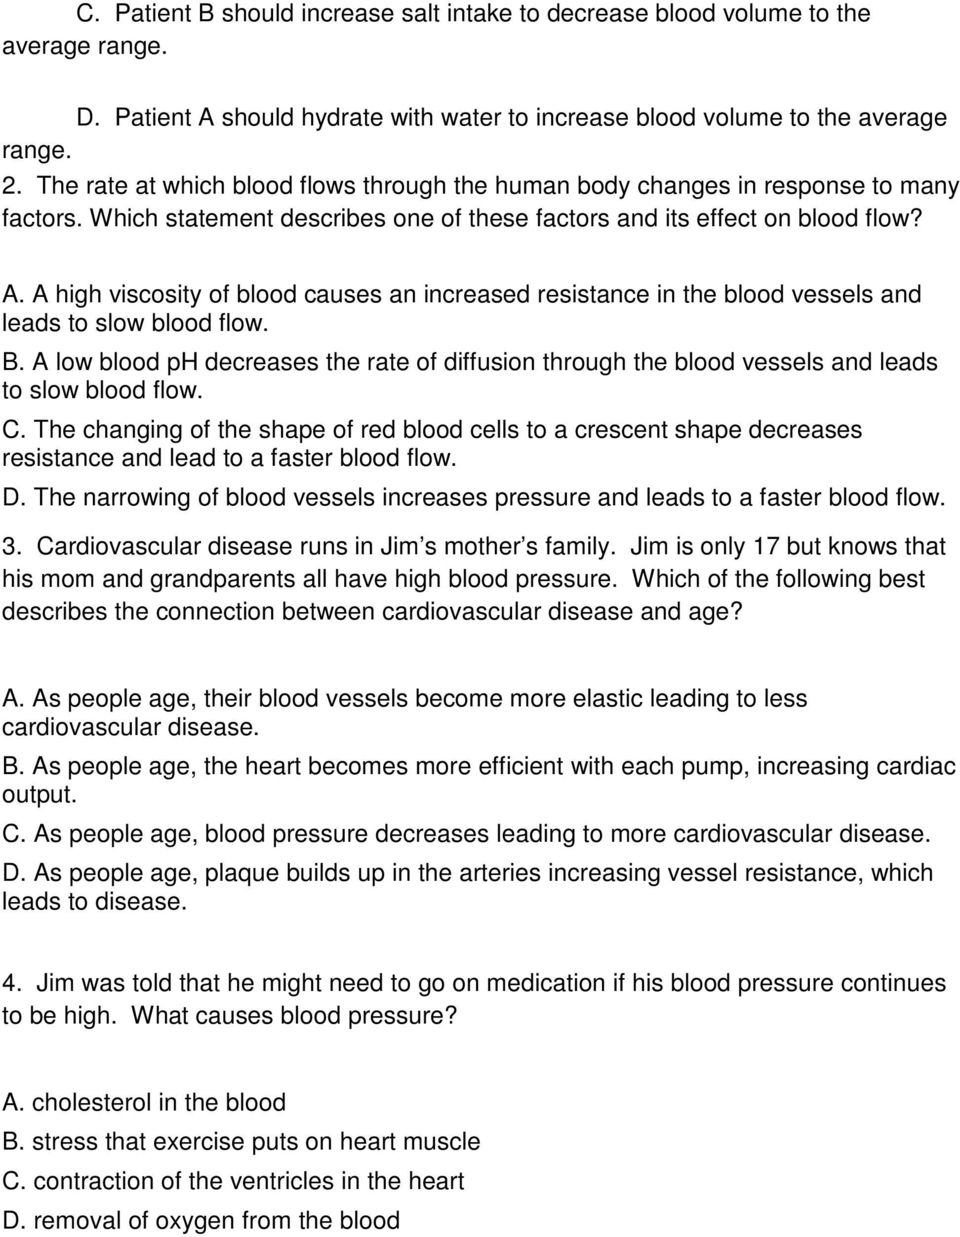 A high viscosity of blood causes an increased resistance in the blood vessels and leads to slow blood flow. B.